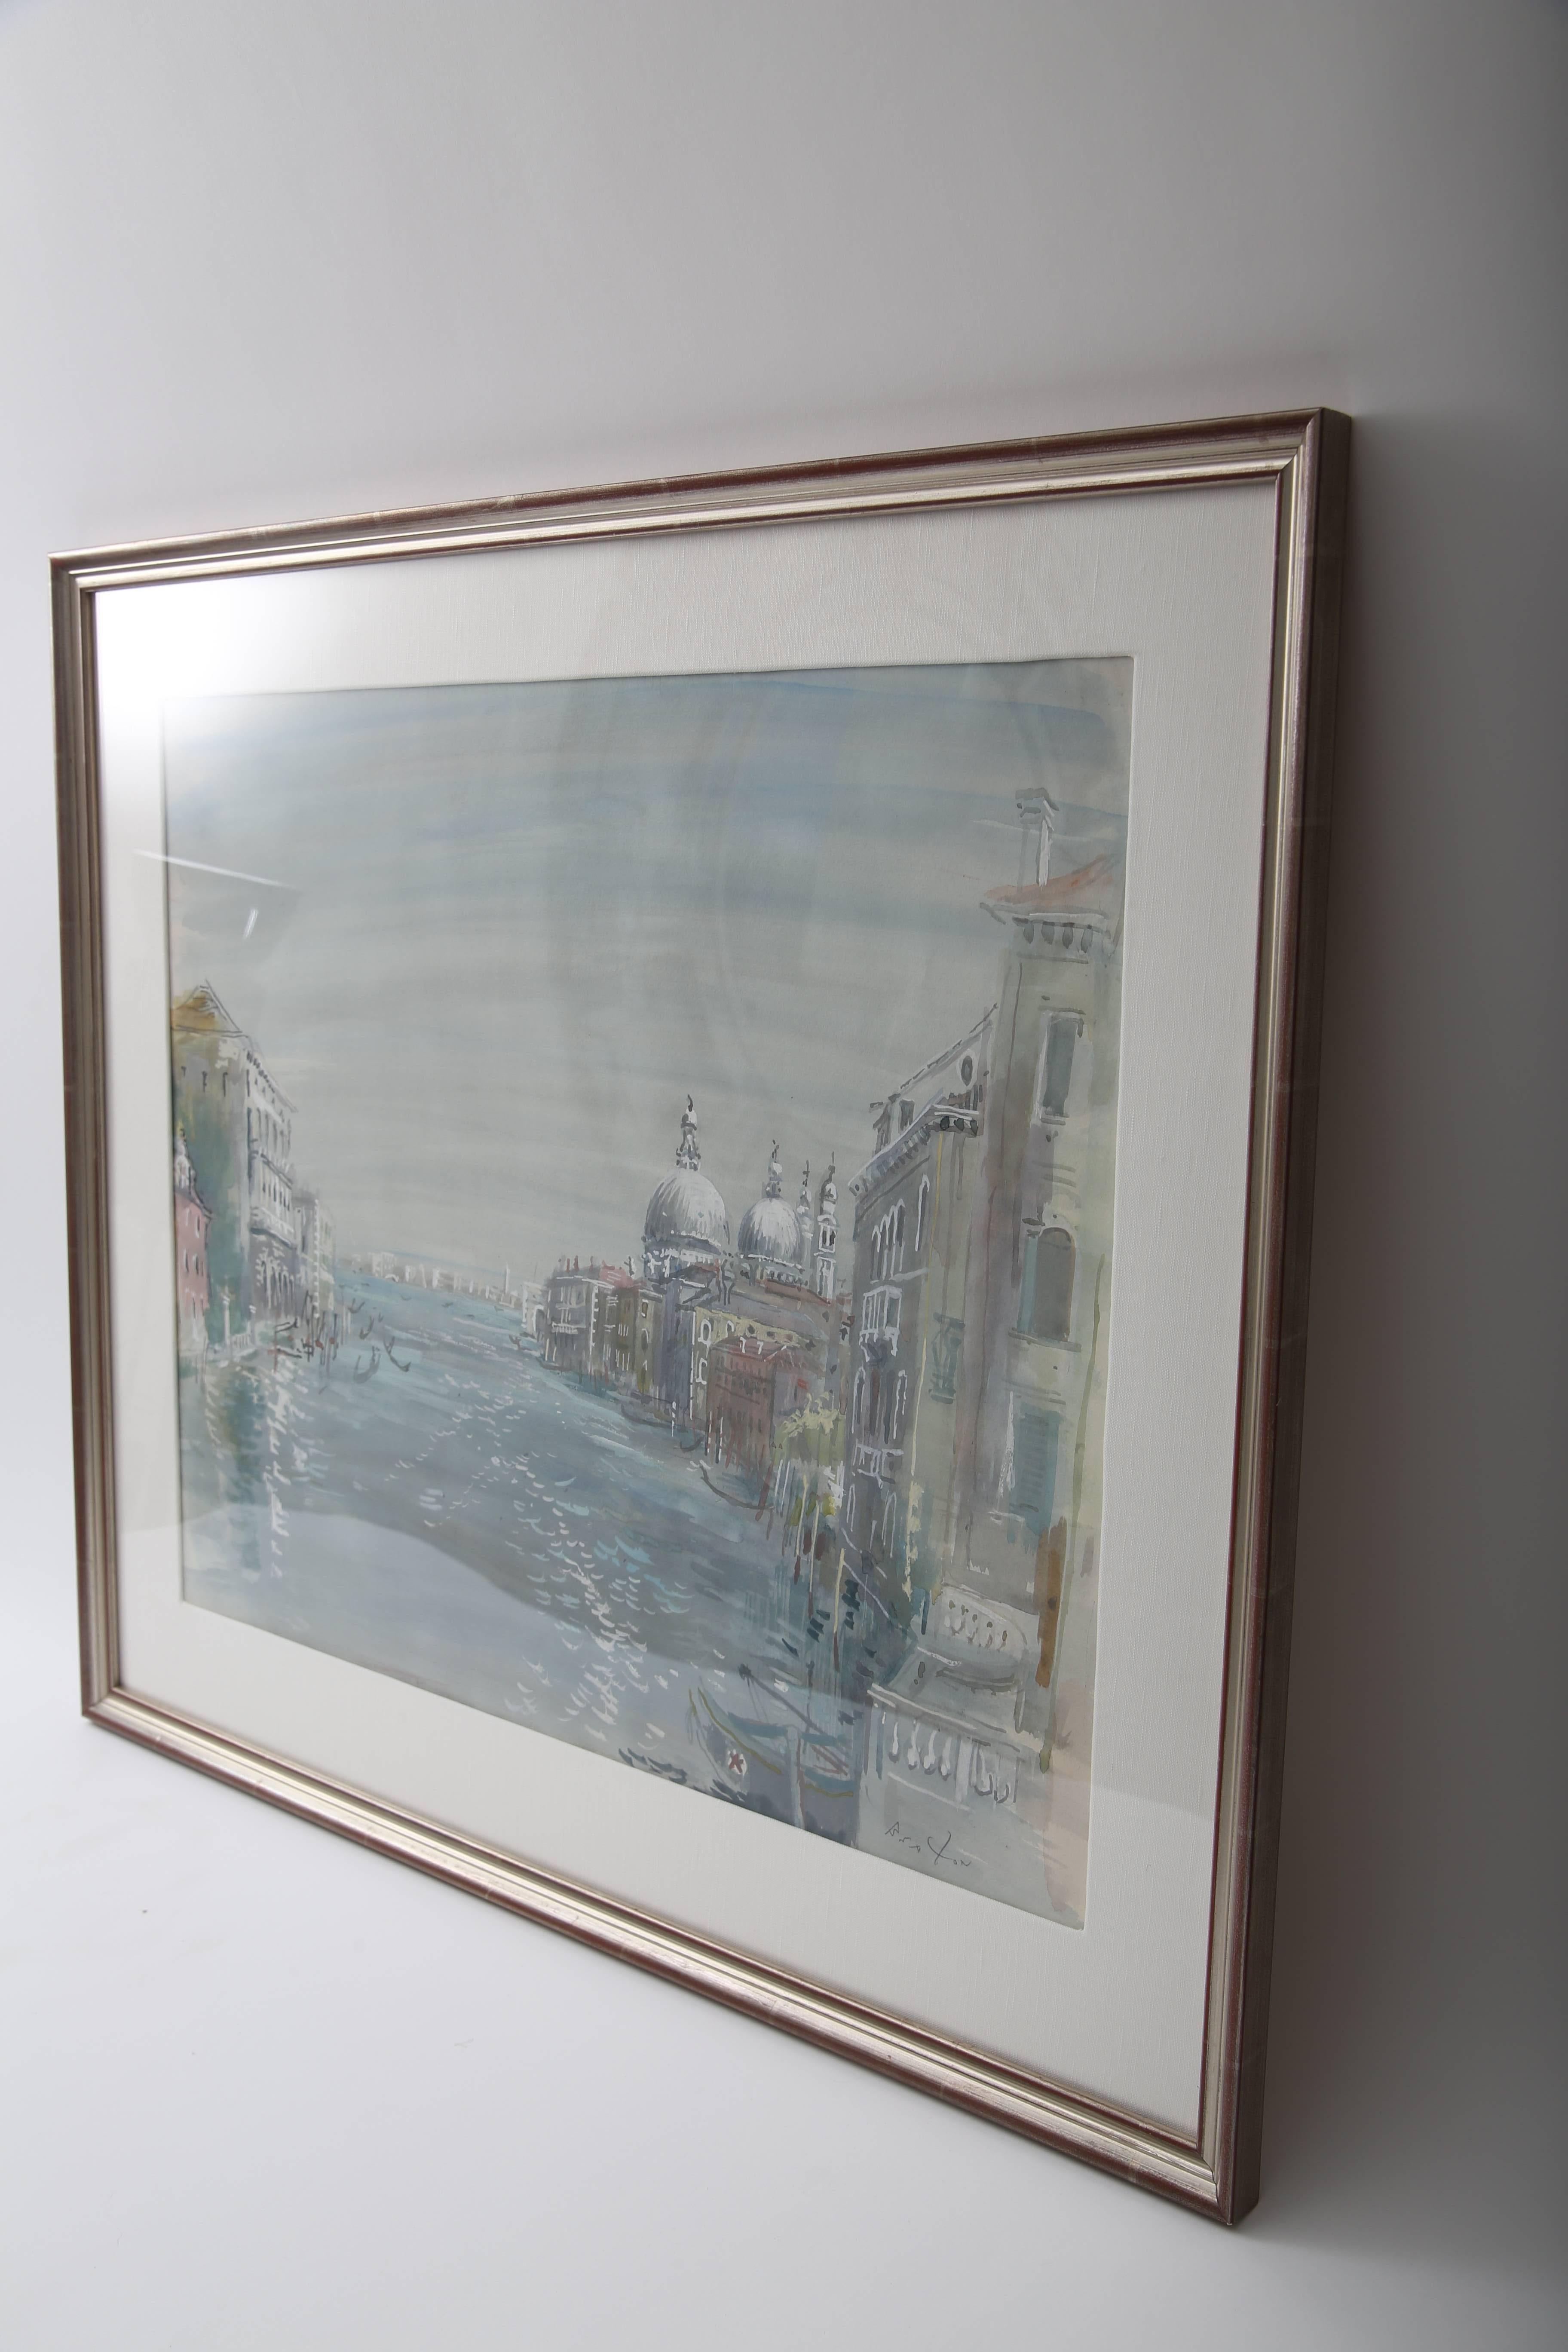 This stylish and beautiful watercolor of the Grand Canal of Venice was painted by Cecil Beaton and dates to the 1920s. The piece was acquired from a Palm Beach estate.

Note: Image dimensions are 18